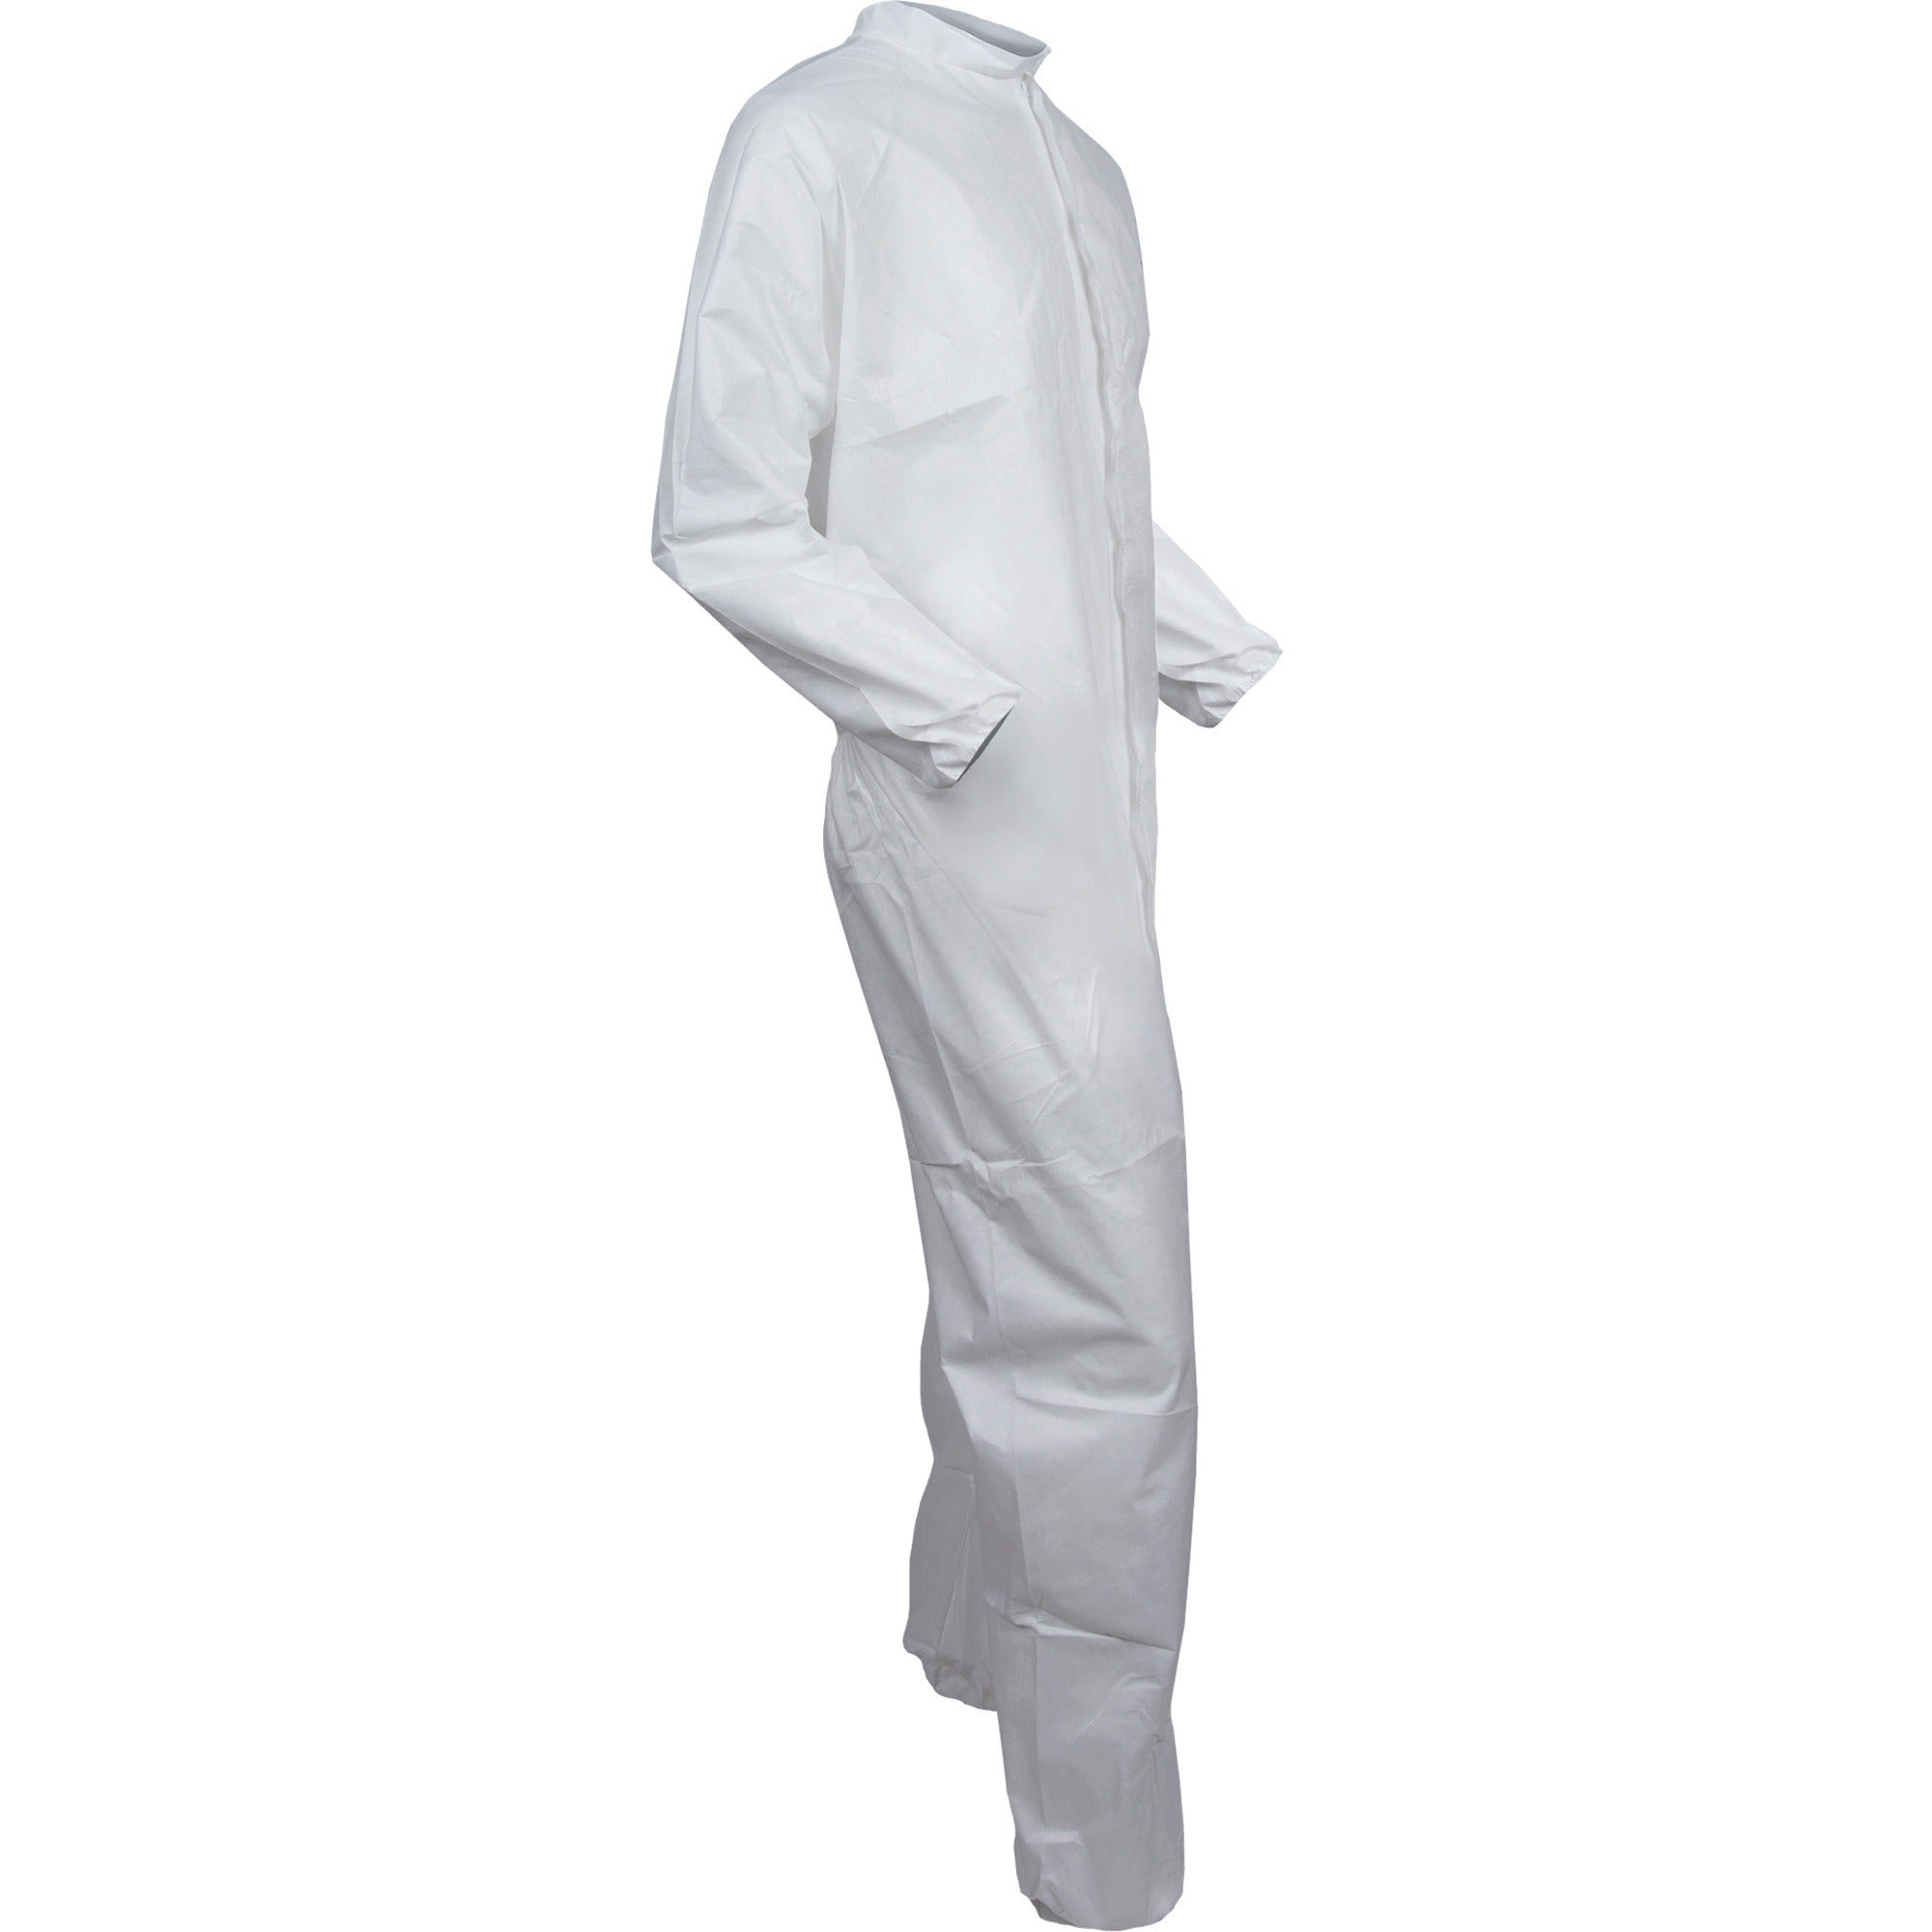 kleenguard-a40-coveralls-zipper-front-2-xtra-large-size-liquid-flying-particle-protection-white-comfortable-zipper-front-breathable-25-carton_kcc44305 - 3